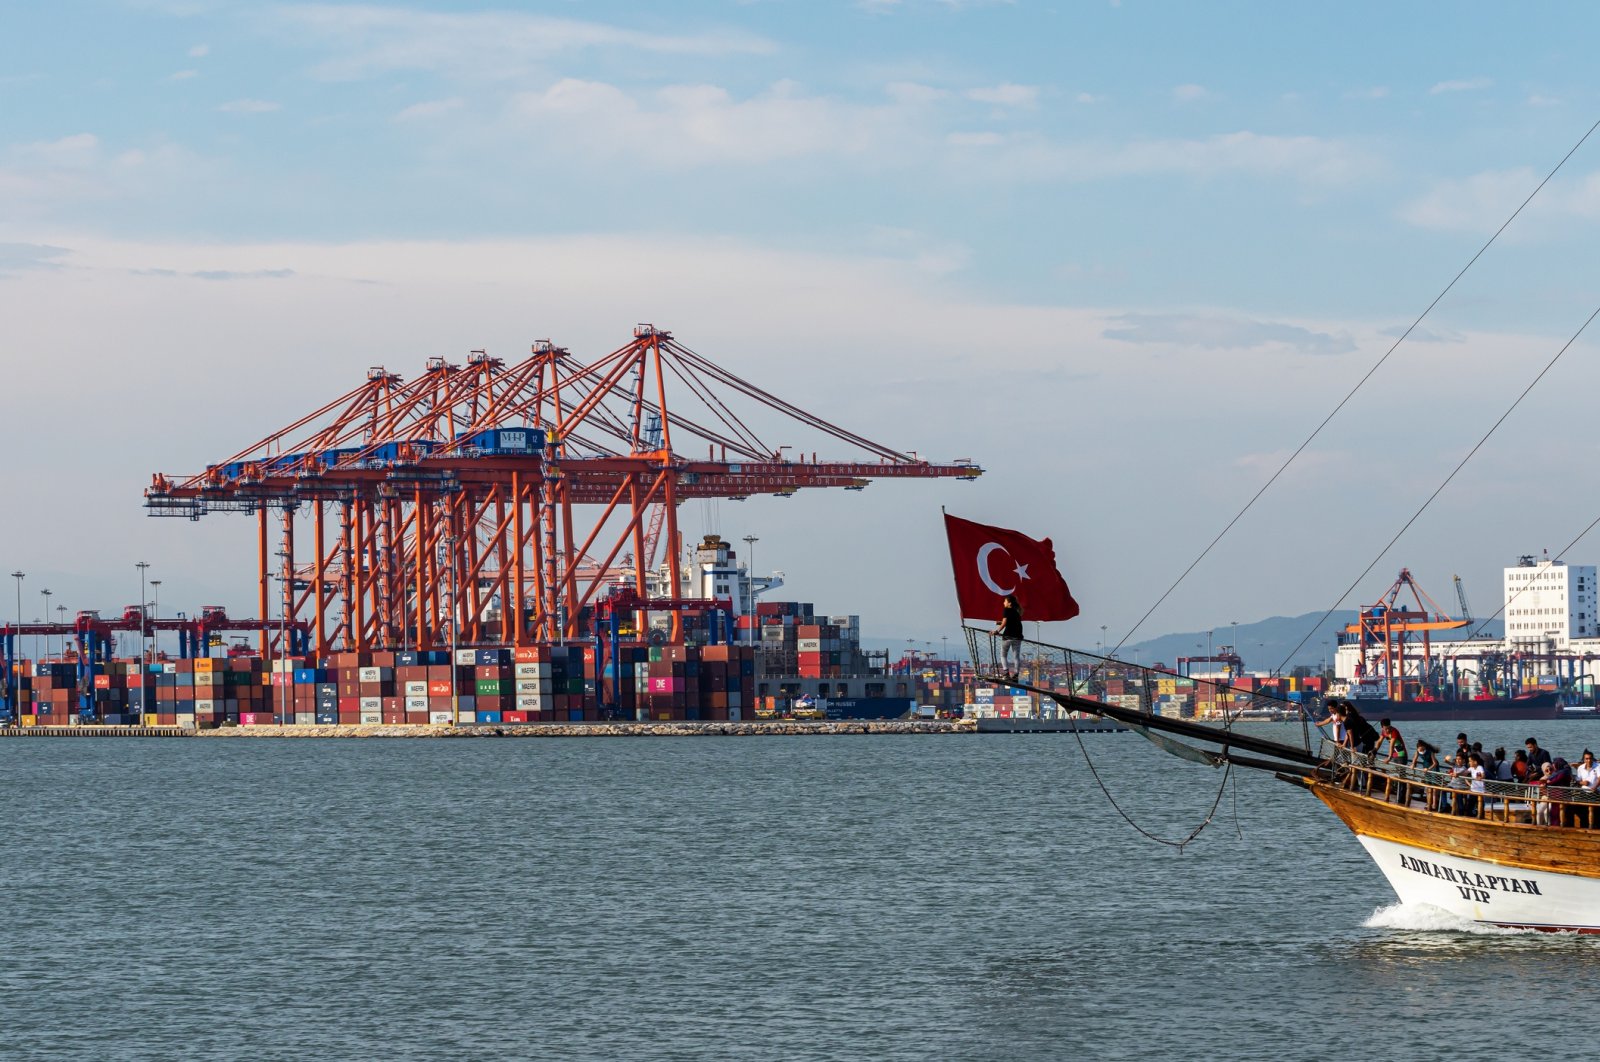 Containers are seen at the Mersin International Port (MIP) in southern Mersin province, Turkey, June 14, 2020. (Shutterstock Photo by Can Aran)